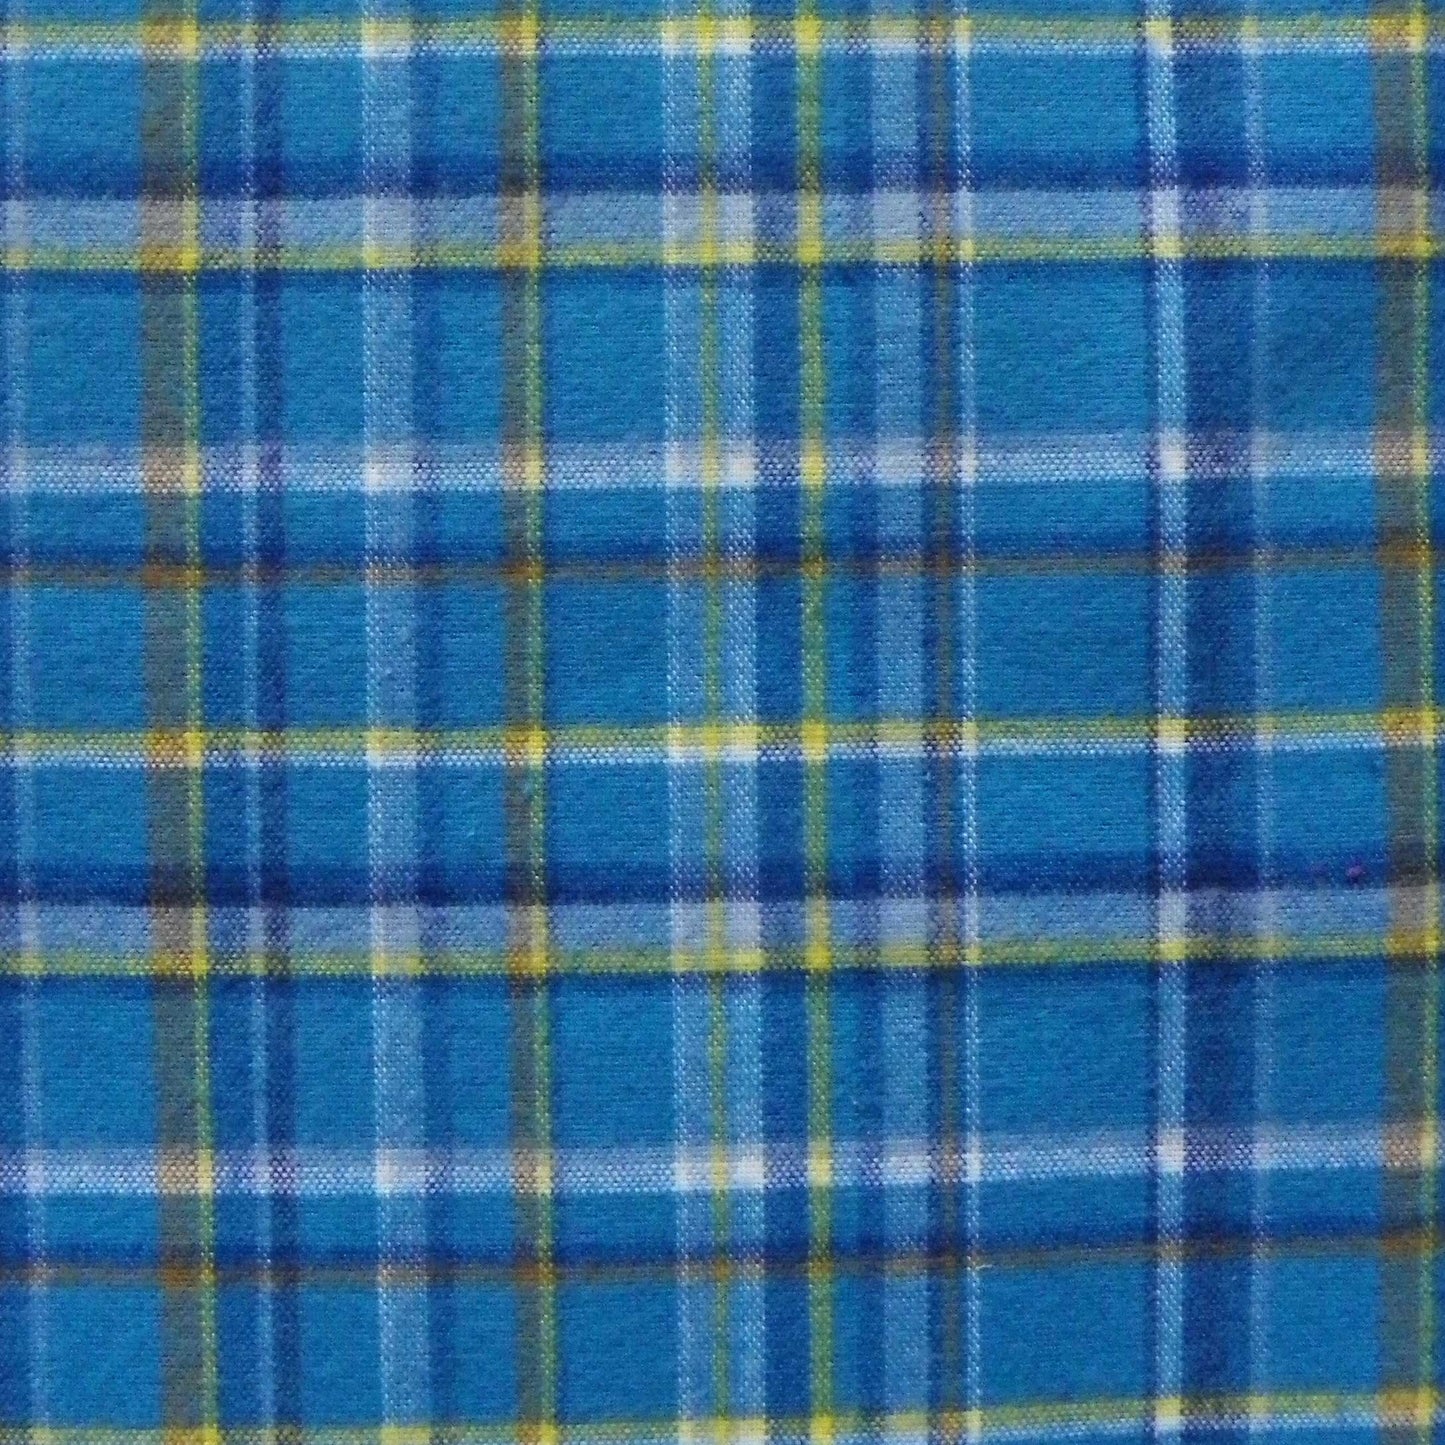 Green Mountain Flannel blue, yellow, navy and white plaid